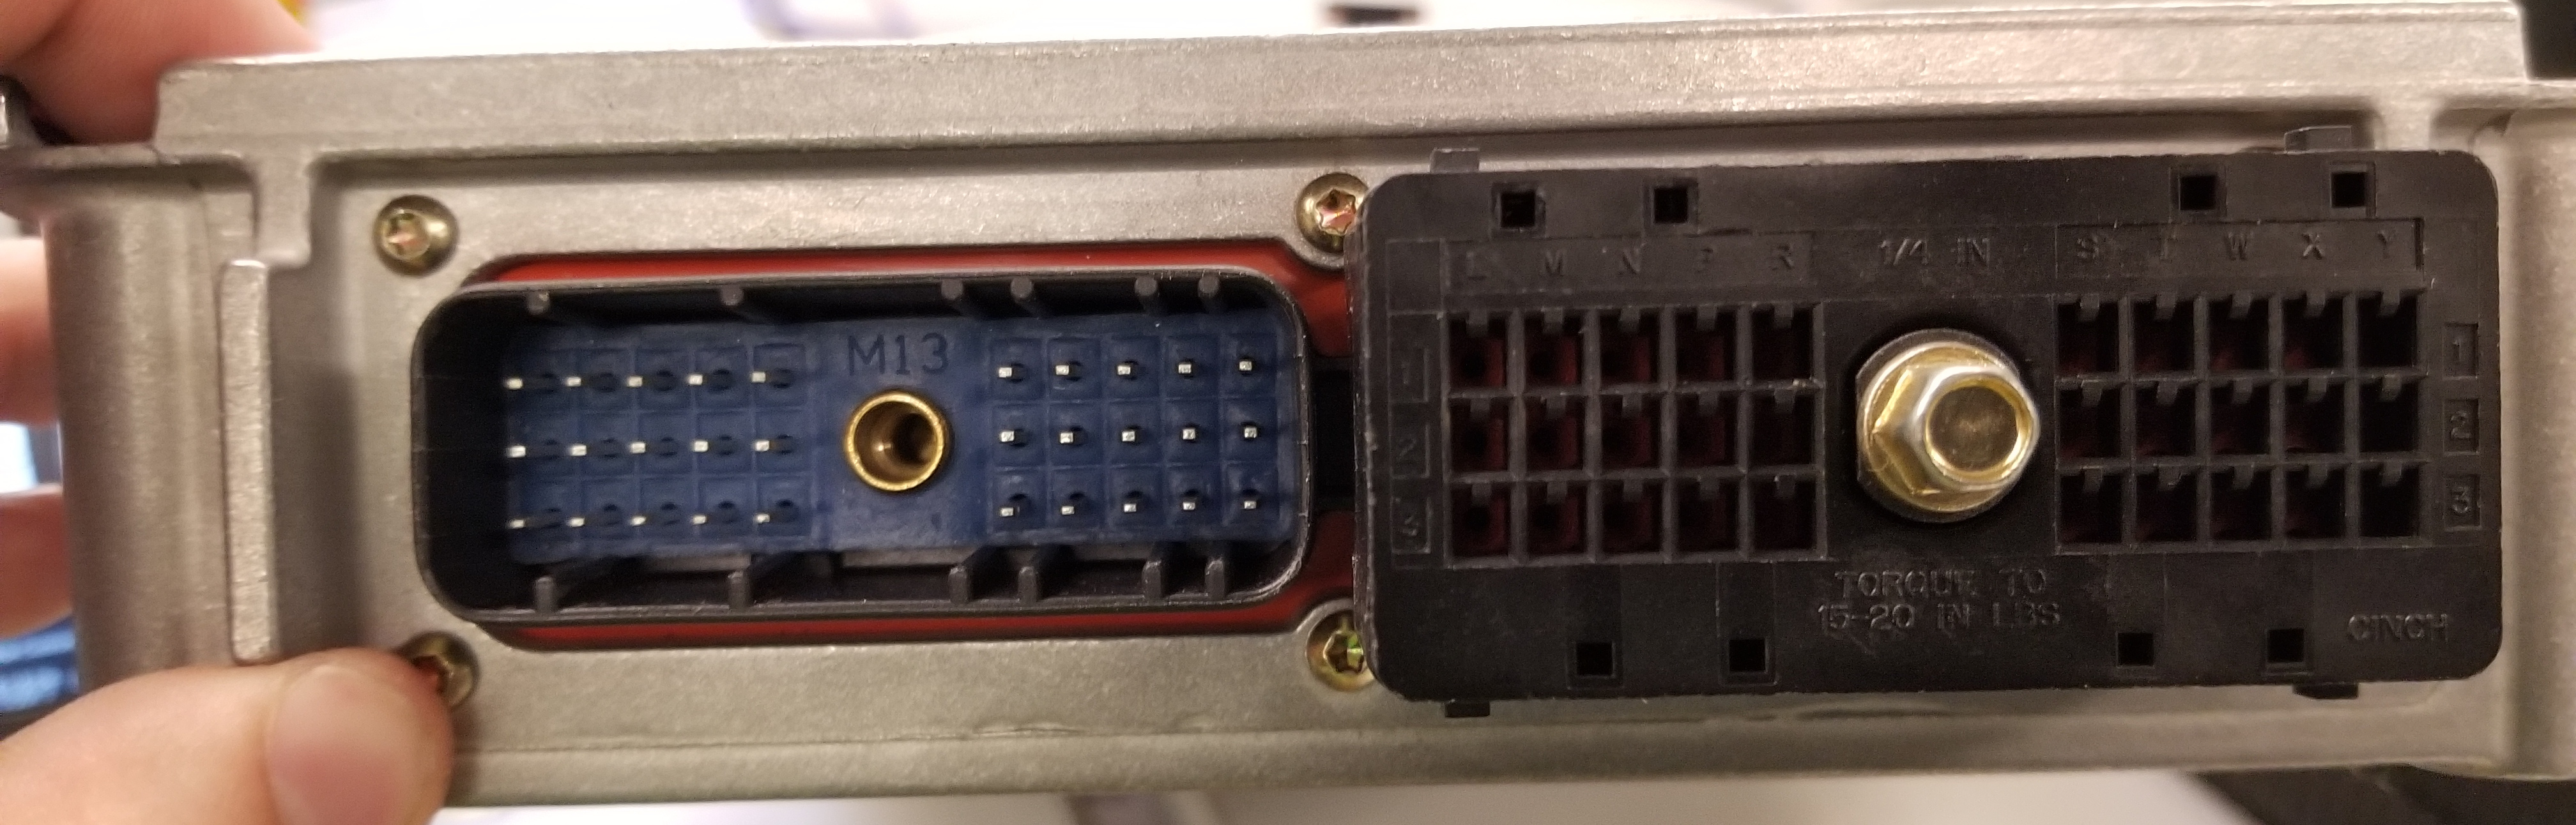 Head on images of the ECU connectors